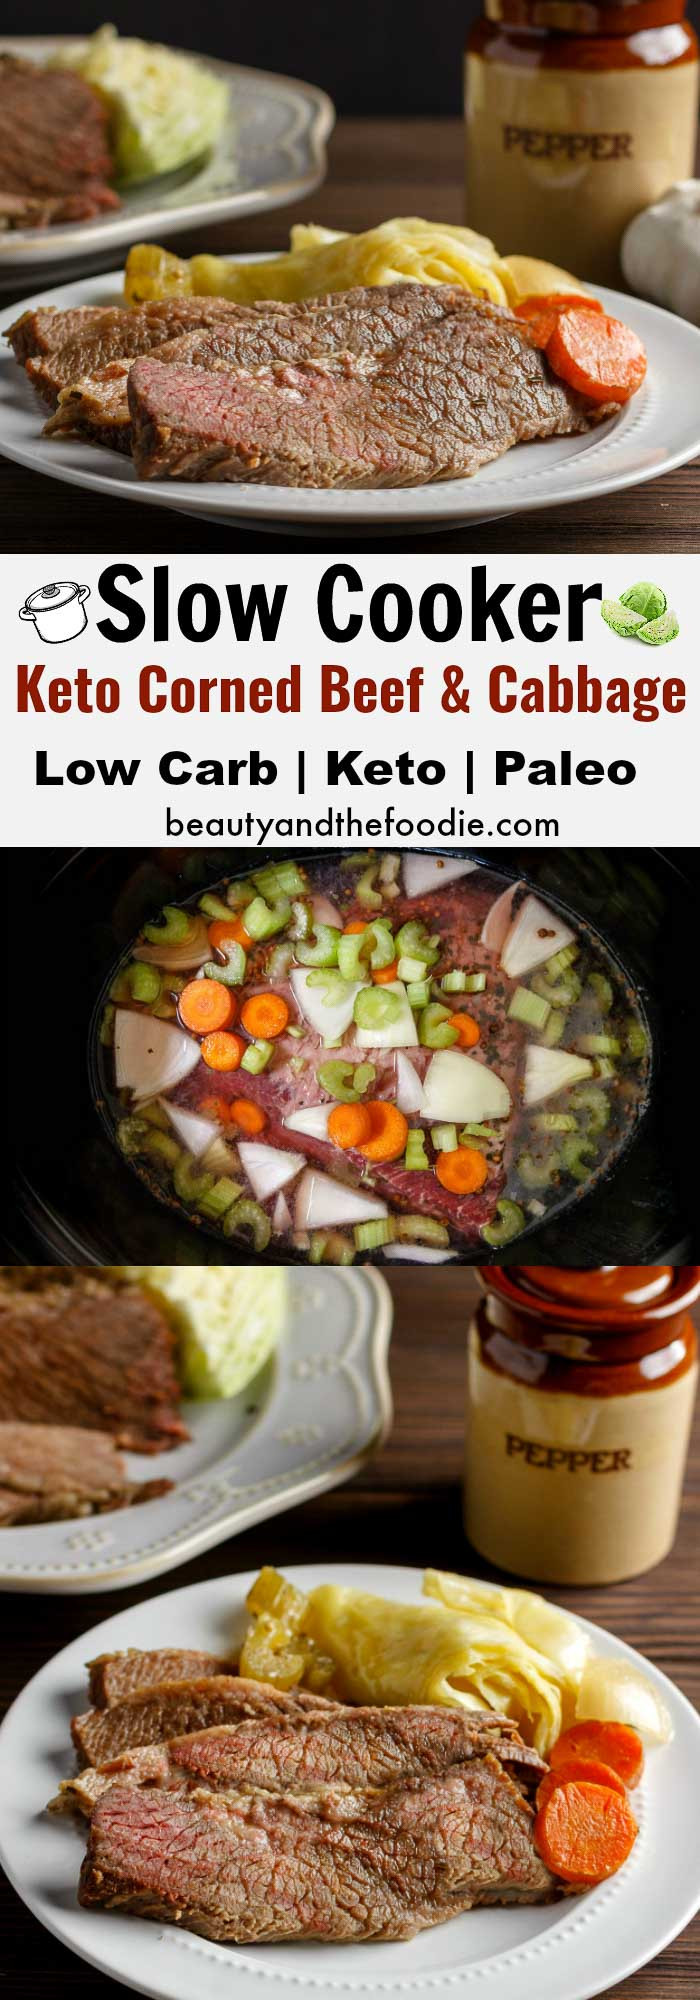 Low Carb Slow Cooker Recipes Beef
 Slow Cooker Keto Corned Beef Cabbage